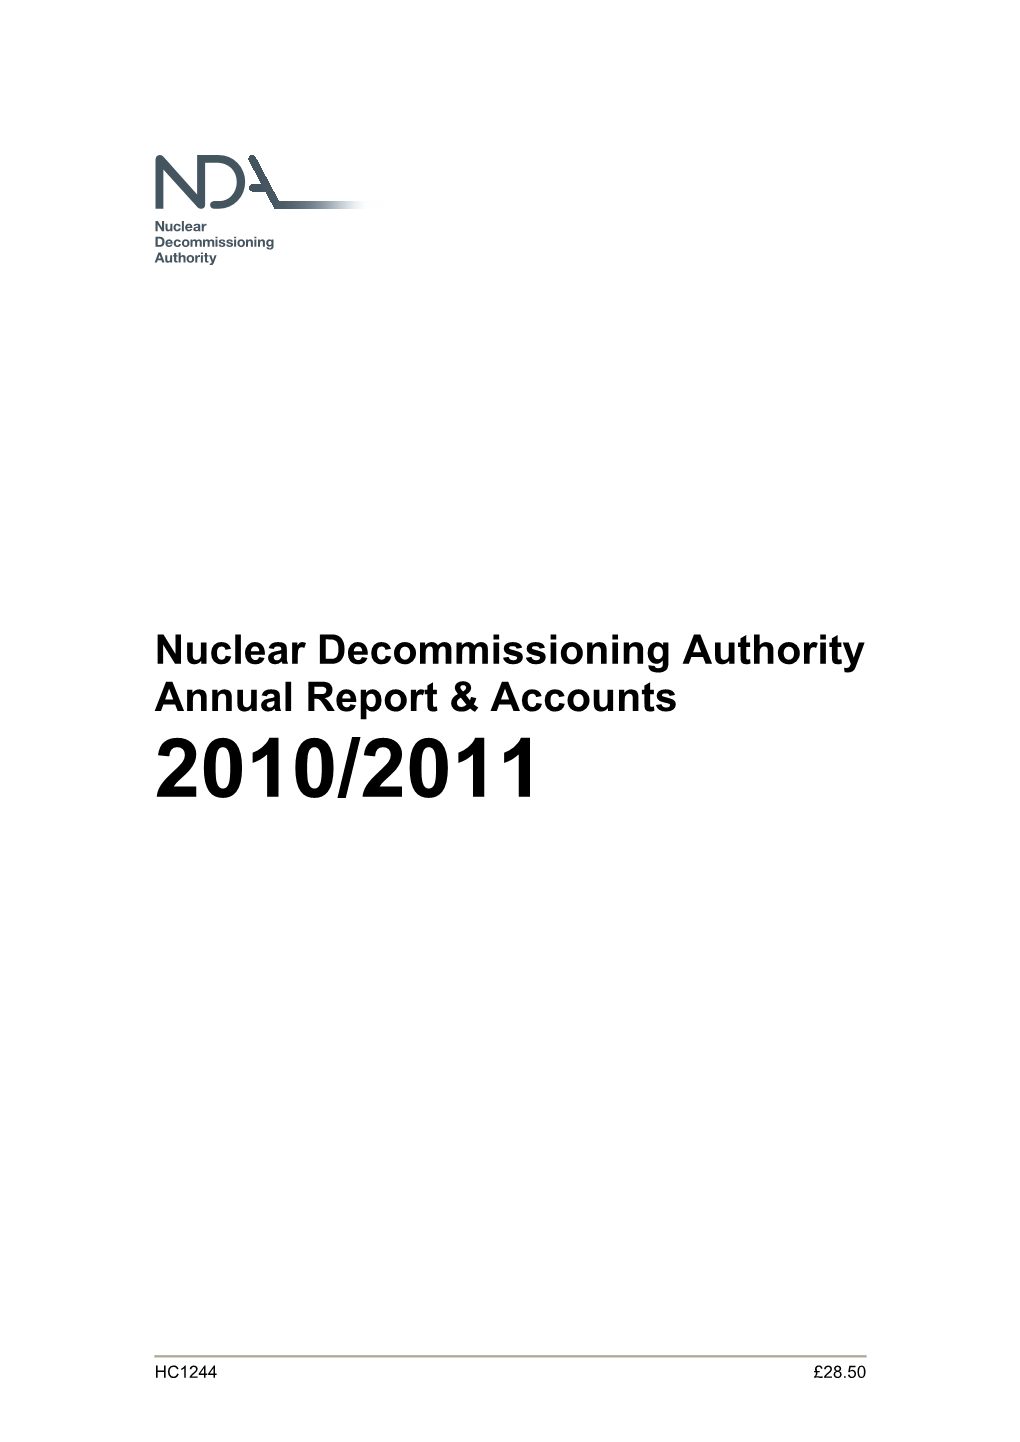 Nuclear Decommissioning Authority Annual Report & Accounts 2010/2011